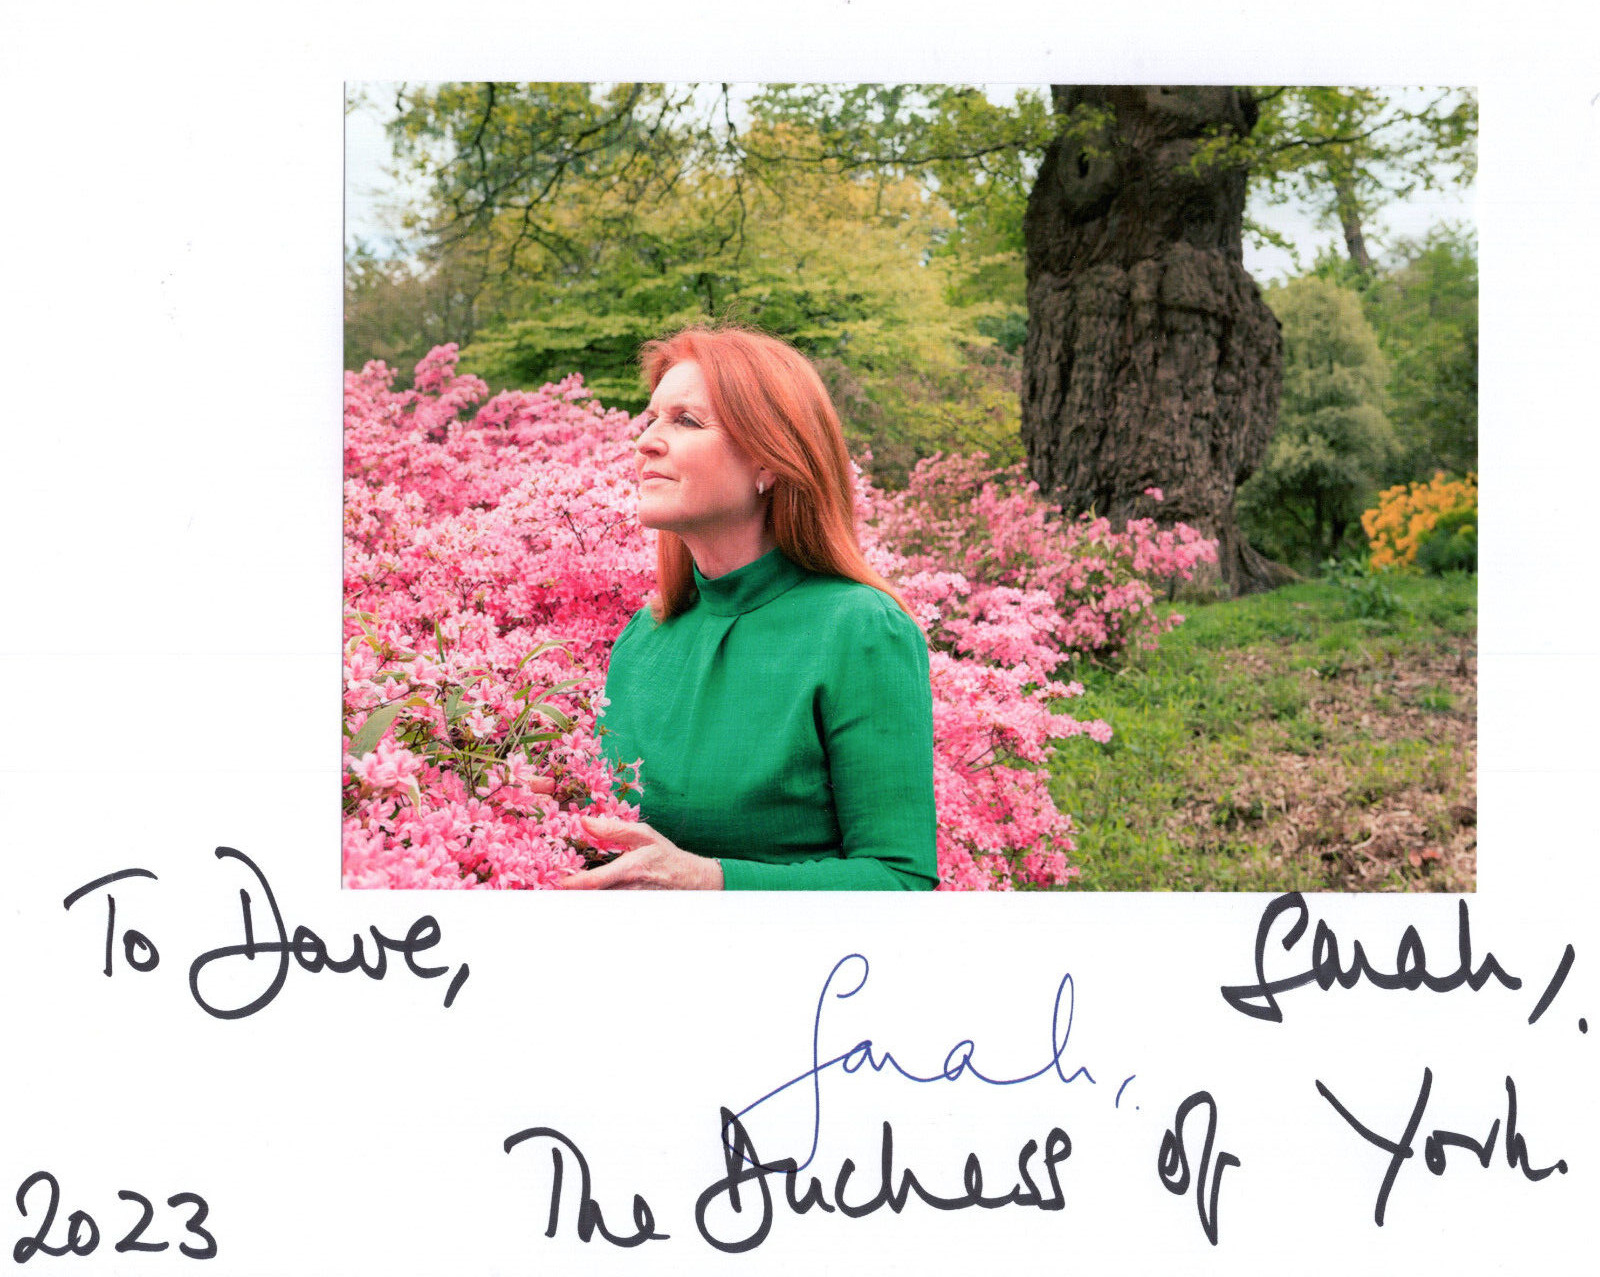 SARAH FERGUSON SIGNED 8x10 COLOR PHOTO     SIGNED DUCHESS OF YORK        TO DAVE